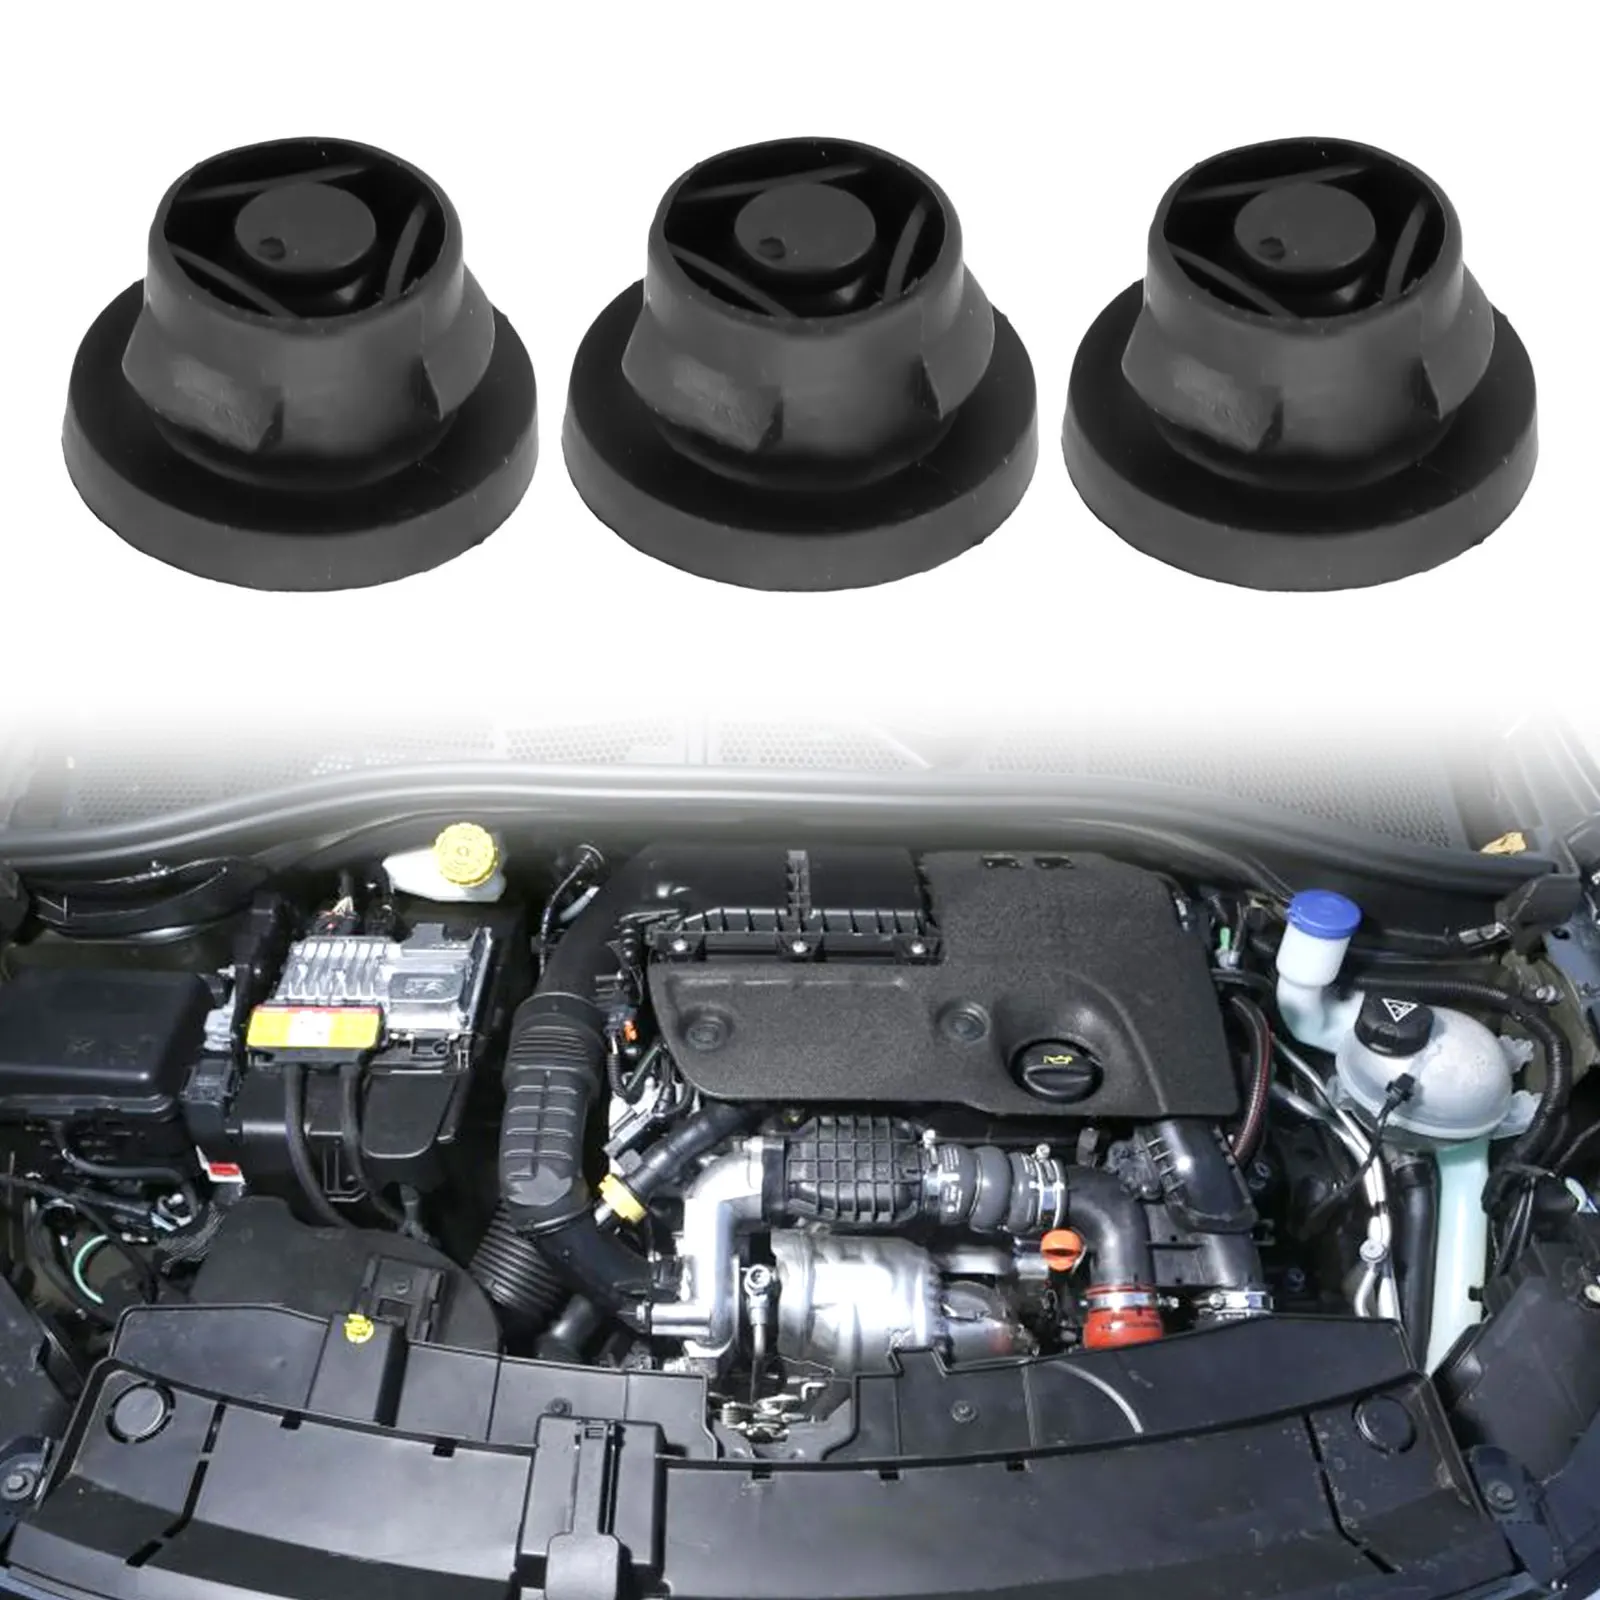 

3Pcs/set Car Air Filter Rubber Insert Grommet Hood Rubber Gasket Auto Parts For 1.6 HDI Diesel 1422A3 1422.A3